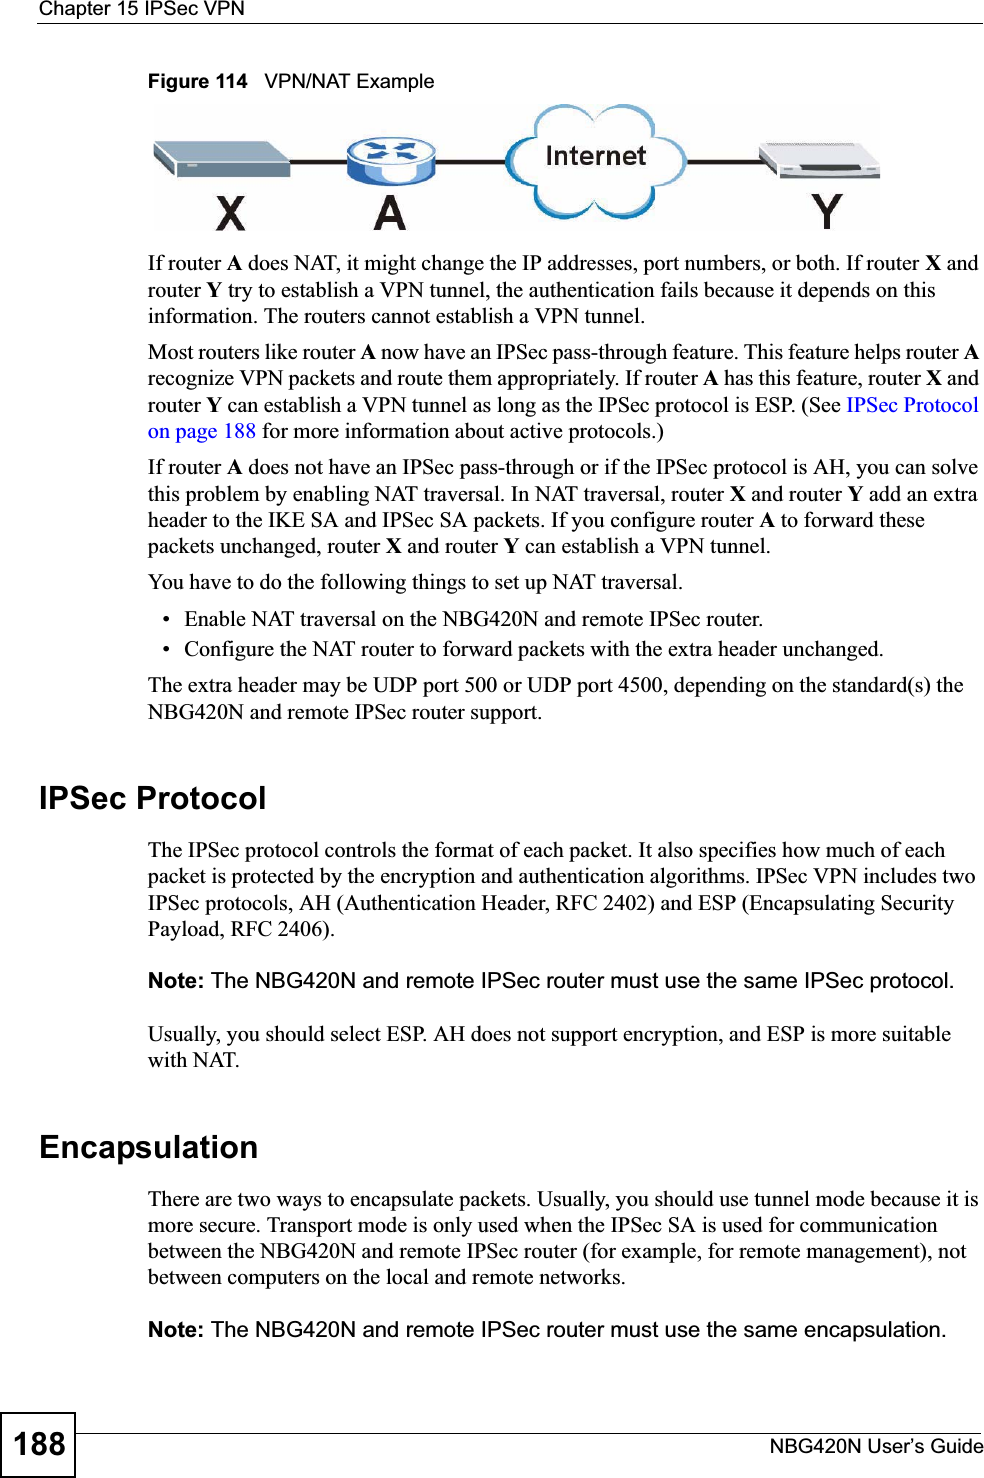 Chapter 15 IPSec VPNNBG420N User’s Guide188Figure 114   VPN/NAT ExampleIf router A does NAT, it might change the IP addresses, port numbers, or both. If router X and router Y try to establish a VPN tunnel, the authentication fails because it depends on this information. The routers cannot establish a VPN tunnel.Most routers like router A now have an IPSec pass-through feature. This feature helps router Arecognize VPN packets and route them appropriately. If router A has this feature, router X and router Y can establish a VPN tunnel as long as the IPSec protocol is ESP. (See IPSec Protocol on page 188 for more information about active protocols.)If router A does not have an IPSec pass-through or if the IPSec protocol is AH, you can solve this problem by enabling NAT traversal. In NAT traversal, router X and router Y add an extra header to the IKE SA and IPSec SA packets. If you configure router A to forward these packets unchanged, router X and router Y can establish a VPN tunnel.You have to do the following things to set up NAT traversal.• Enable NAT traversal on the NBG420N and remote IPSec router.• Configure the NAT router to forward packets with the extra header unchanged. The extra header may be UDP port 500 or UDP port 4500, depending on the standard(s) the NBG420N and remote IPSec router support.IPSec ProtocolThe IPSec protocol controls the format of each packet. It also specifies how much of each packet is protected by the encryption and authentication algorithms. IPSec VPN includes two IPSec protocols, AH (Authentication Header, RFC 2402) and ESP (Encapsulating Security Payload, RFC 2406).Note: The NBG420N and remote IPSec router must use the same IPSec protocol.Usually, you should select ESP. AH does not support encryption, and ESP is more suitable with NAT.EncapsulationThere are two ways to encapsulate packets. Usually, you should use tunnel mode because it is more secure. Transport mode is only used when the IPSec SA is used for communication between the NBG420N and remote IPSec router (for example, for remote management), not between computers on the local and remote networks.Note: The NBG420N and remote IPSec router must use the same encapsulation.